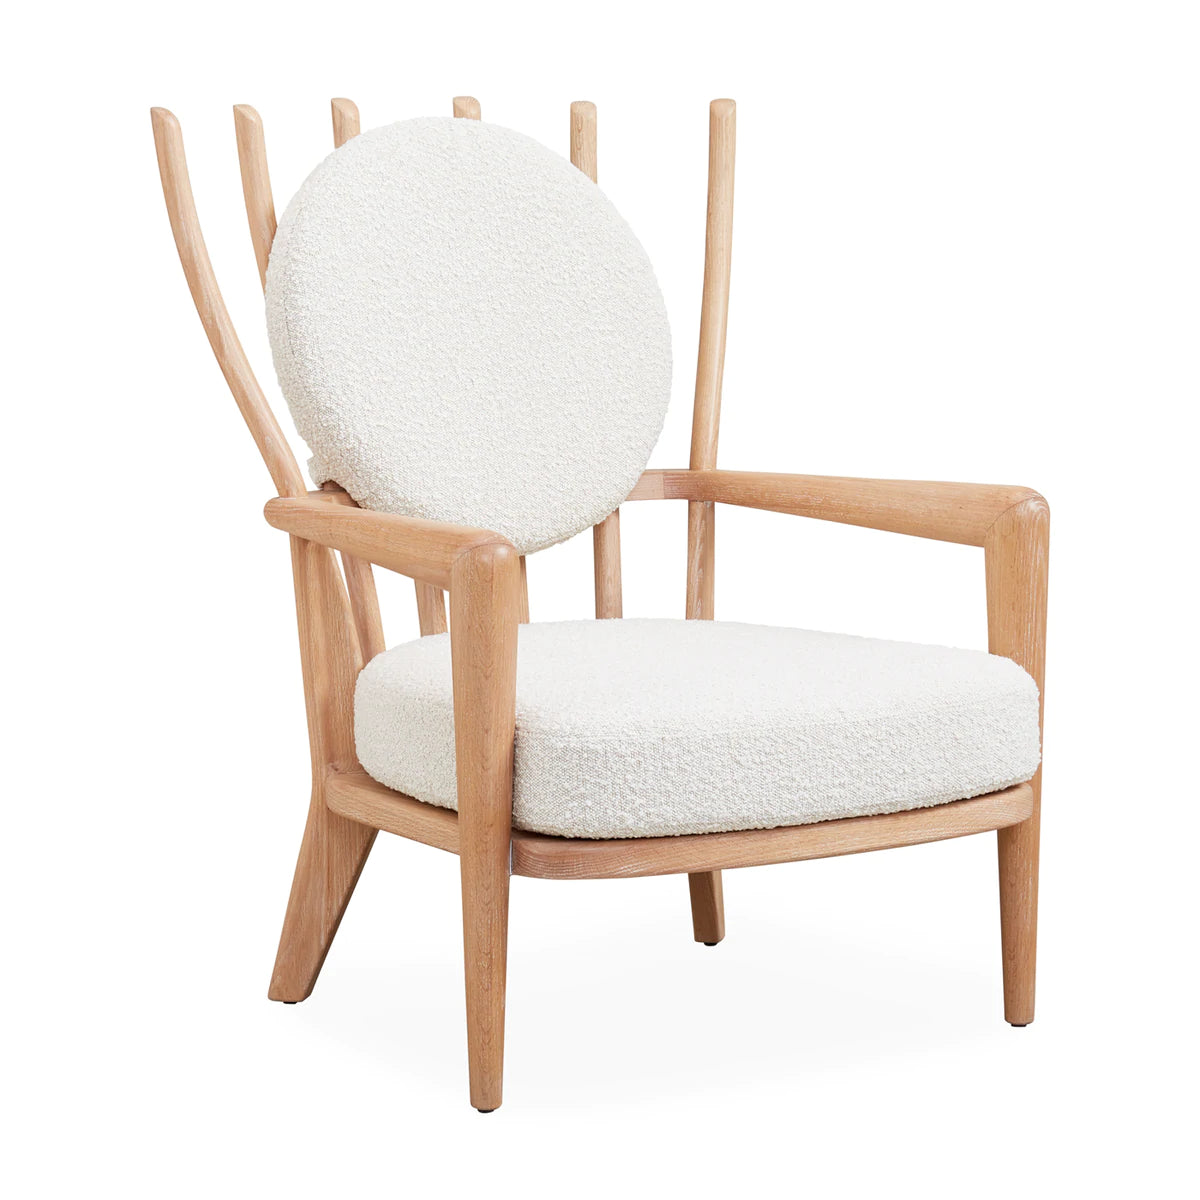 Voltaire Lounge Chair by Jonathan Adler